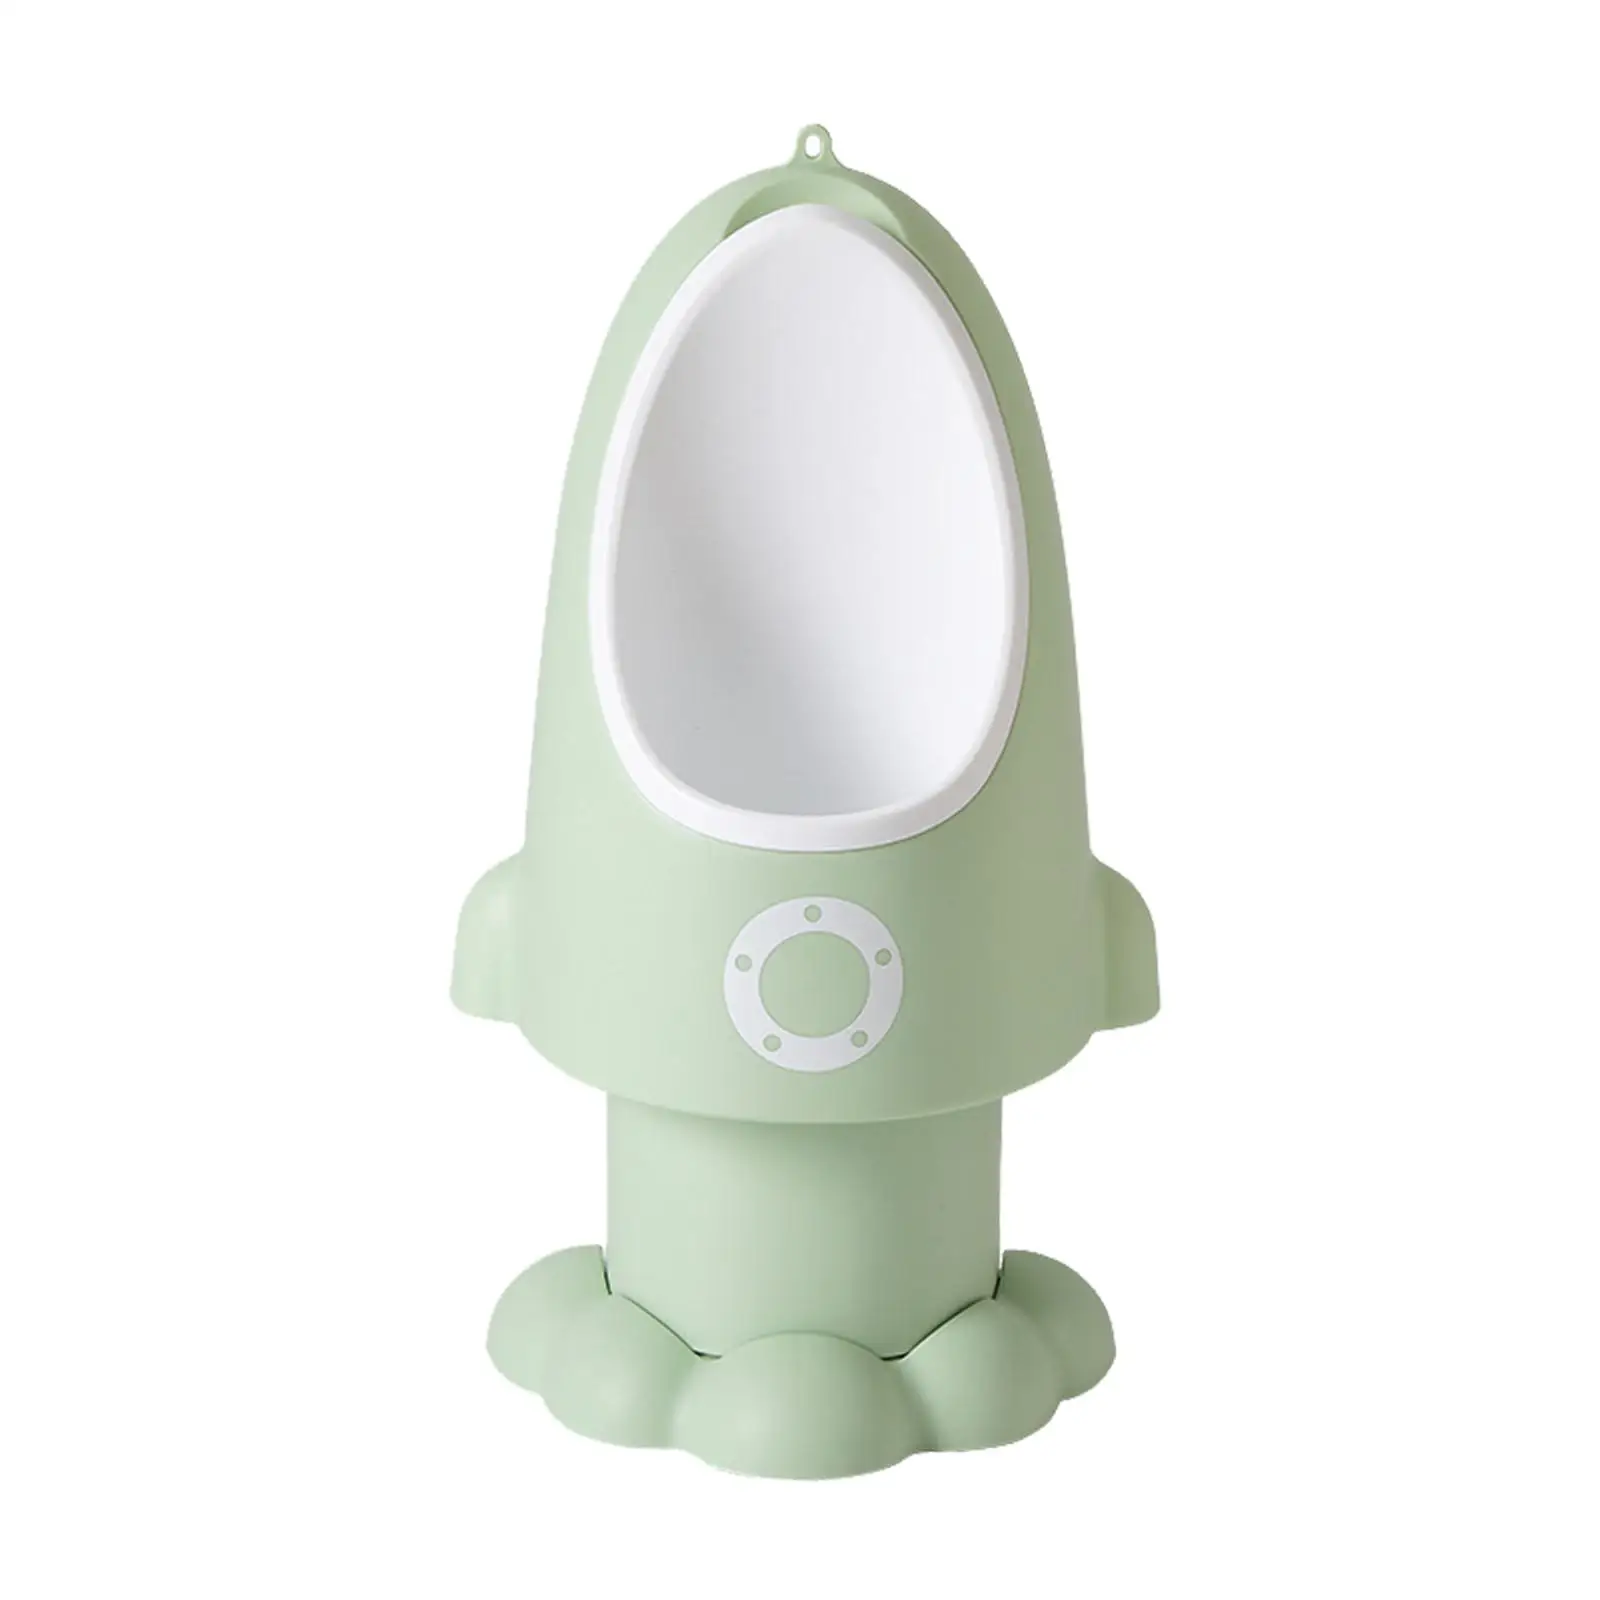 Wall Mounted Training Urinal Pee Training Urinal Trainer for Baby Kids Boys